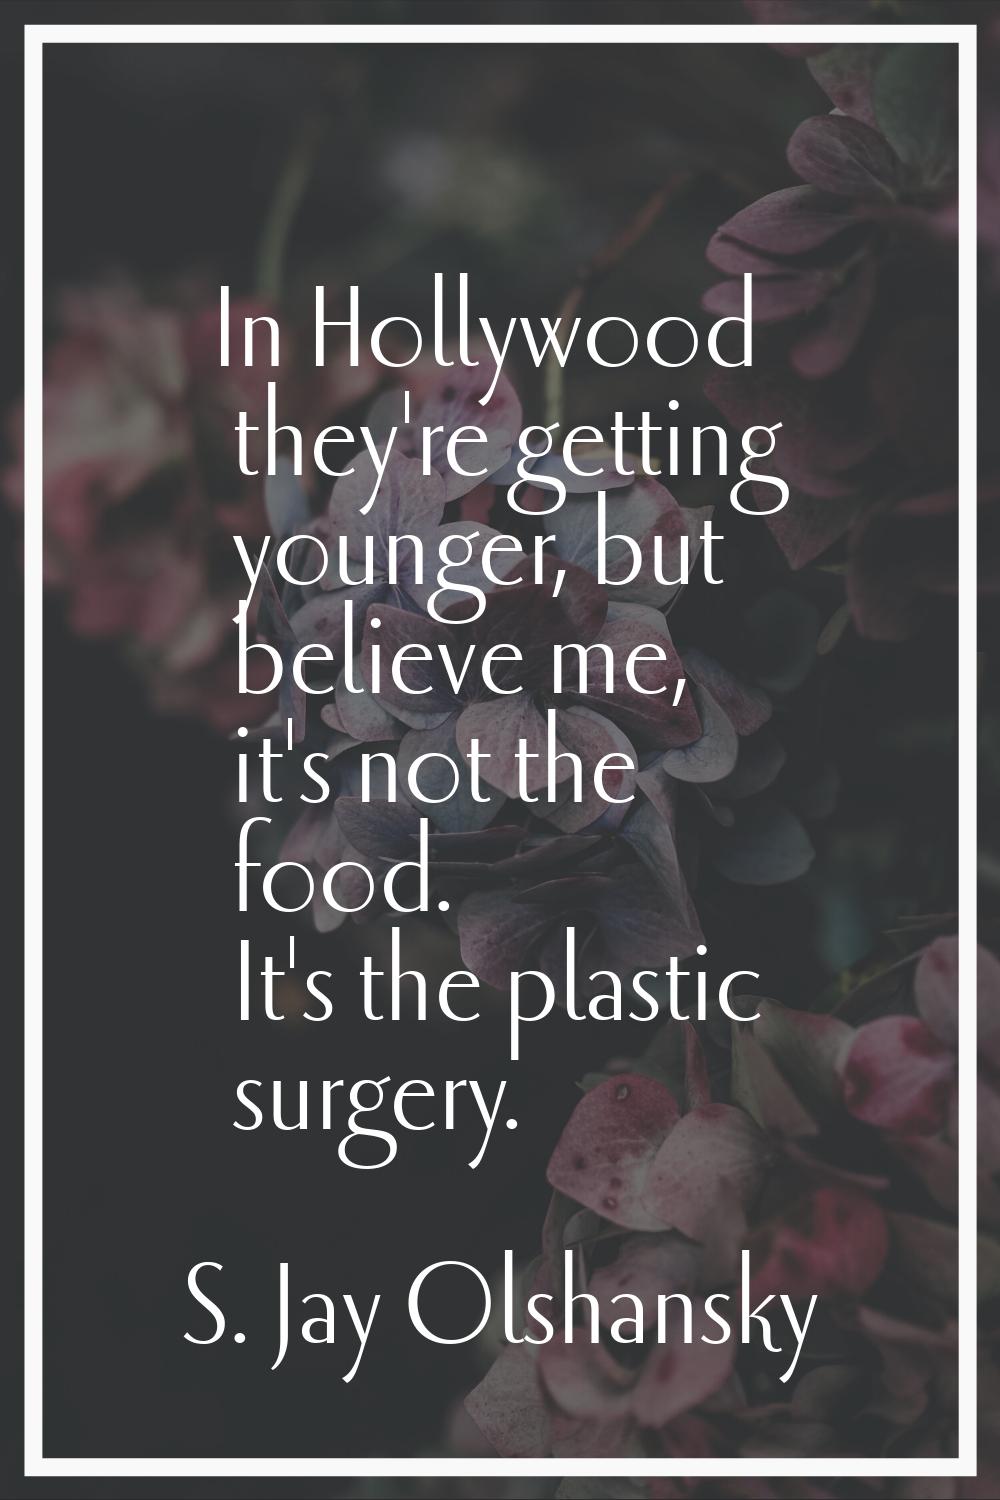 In Hollywood they're getting younger, but believe me, it's not the food. It's the plastic surgery.